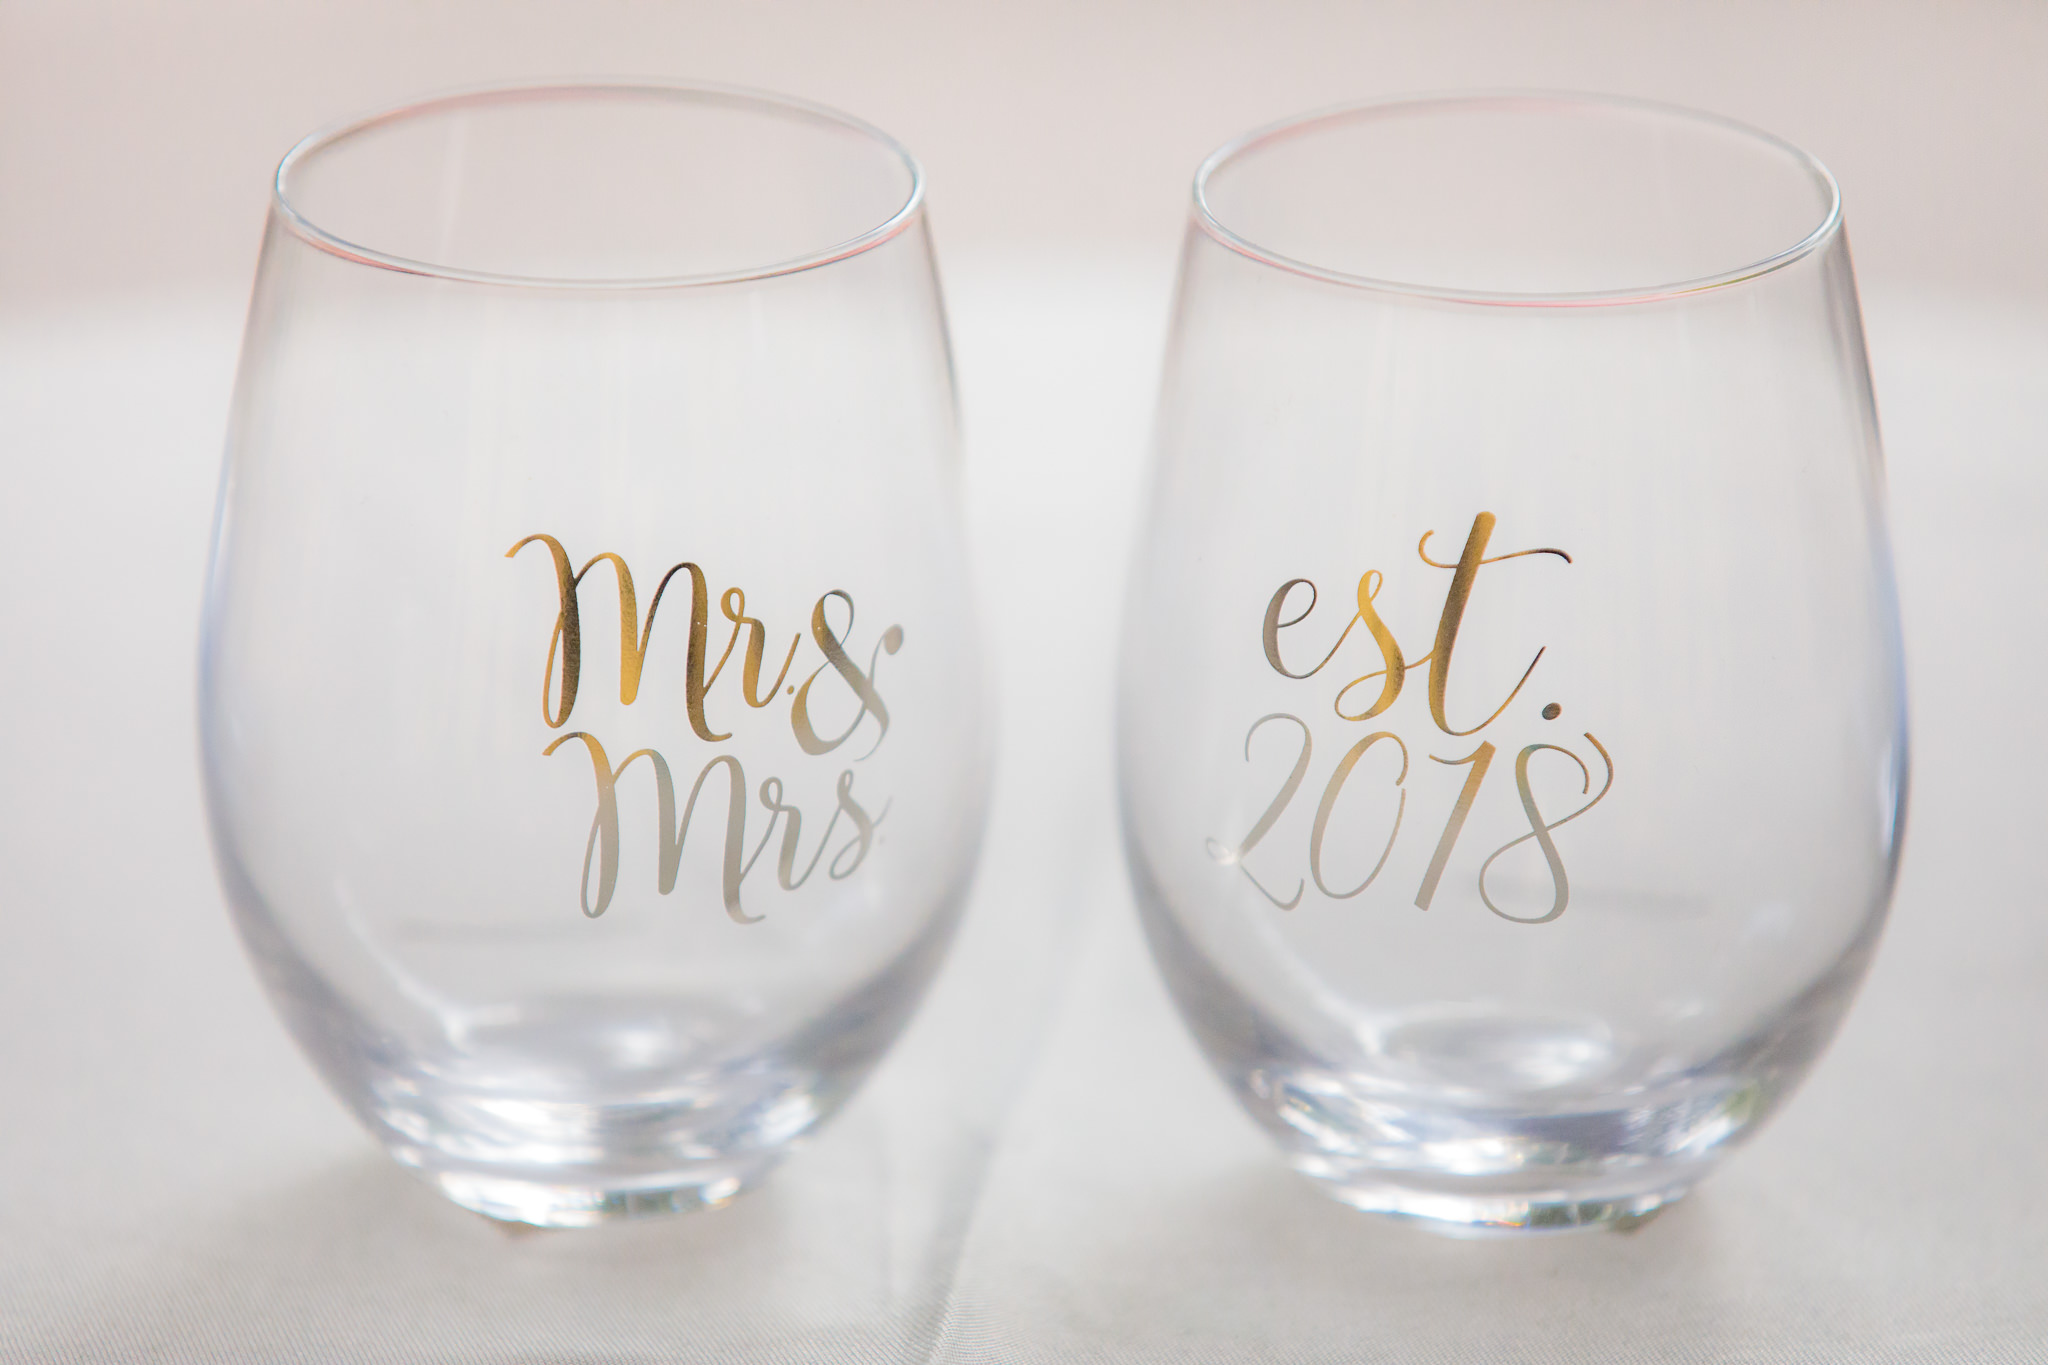 Mr. & Mrs. est. 2018 champagne glasses on the head table at a National Aviary wedding